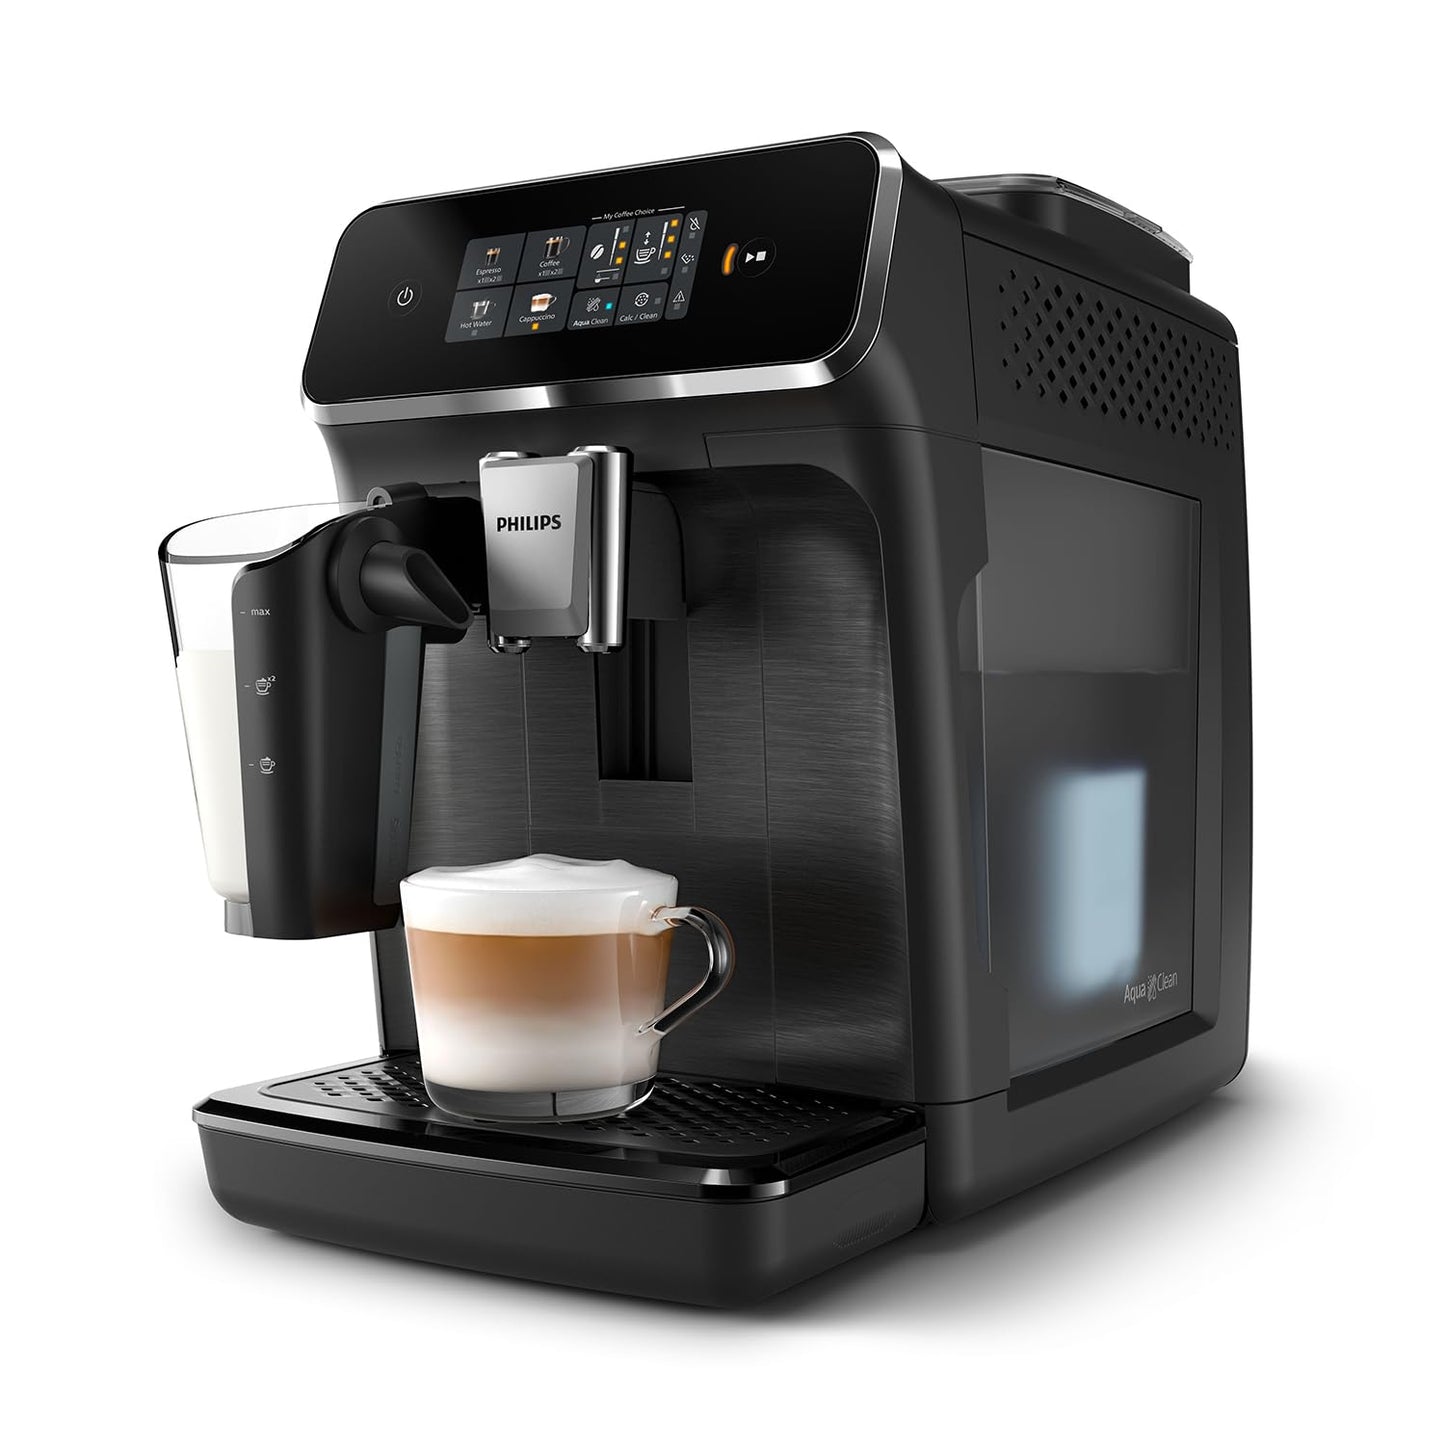 PHILIPS 2300 Series Fully Automatic Espresso Machine - 4 Beverages, Modern color touch screen display, LatteGo milk system, SilentBrew, 100% Ceramic Grinder, AquaClean Filter. Matte Black (EP2330/10)